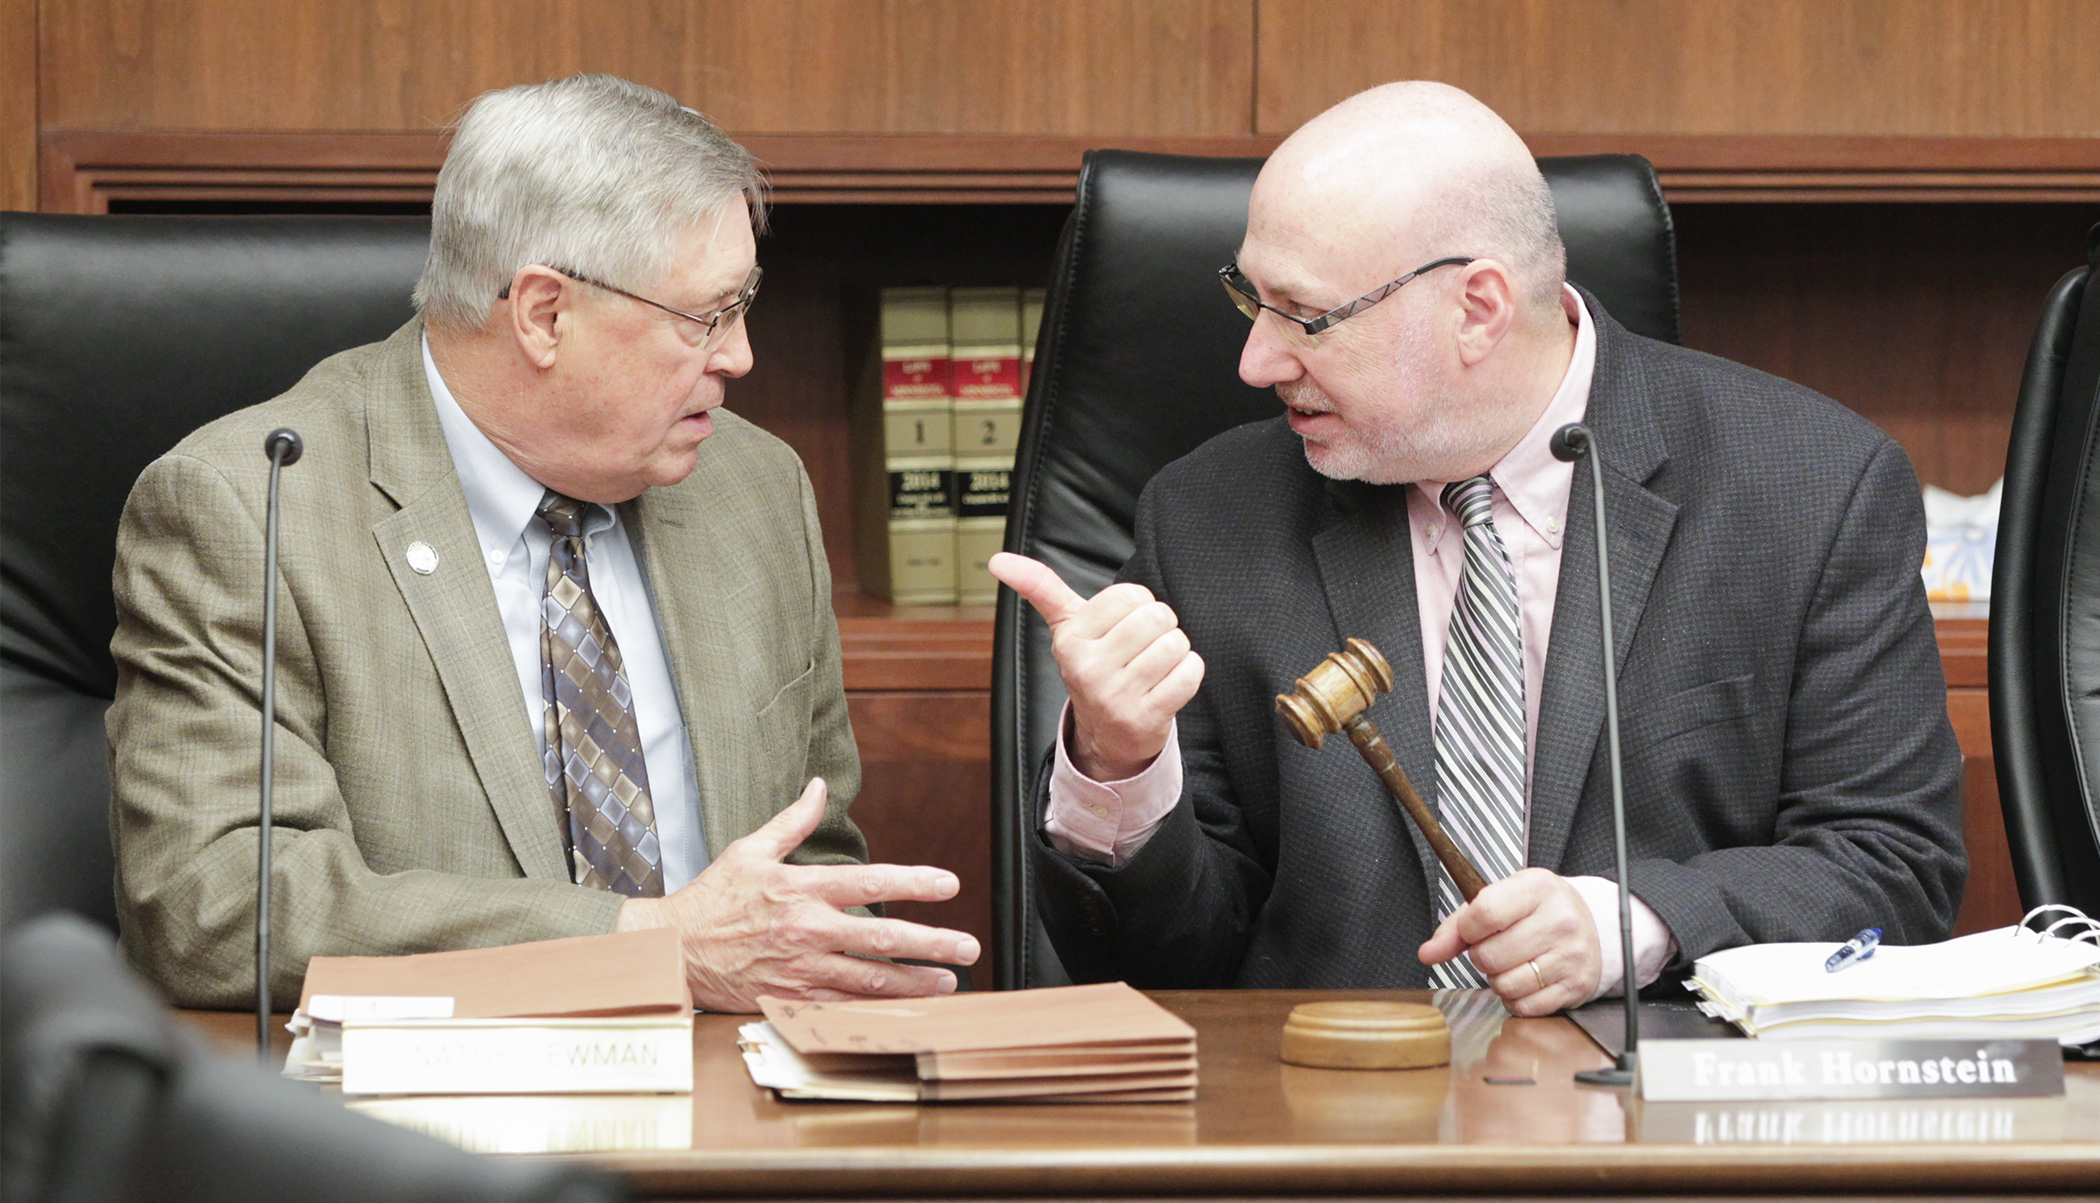 Sen. Scott Newman, left, and Rep. Frank Hornstein confer before the beginning of the May 6 meeting of the House-Senate conference committee on HF1555, the omnibus transportation finance bill. Photo by Paul Battaglia